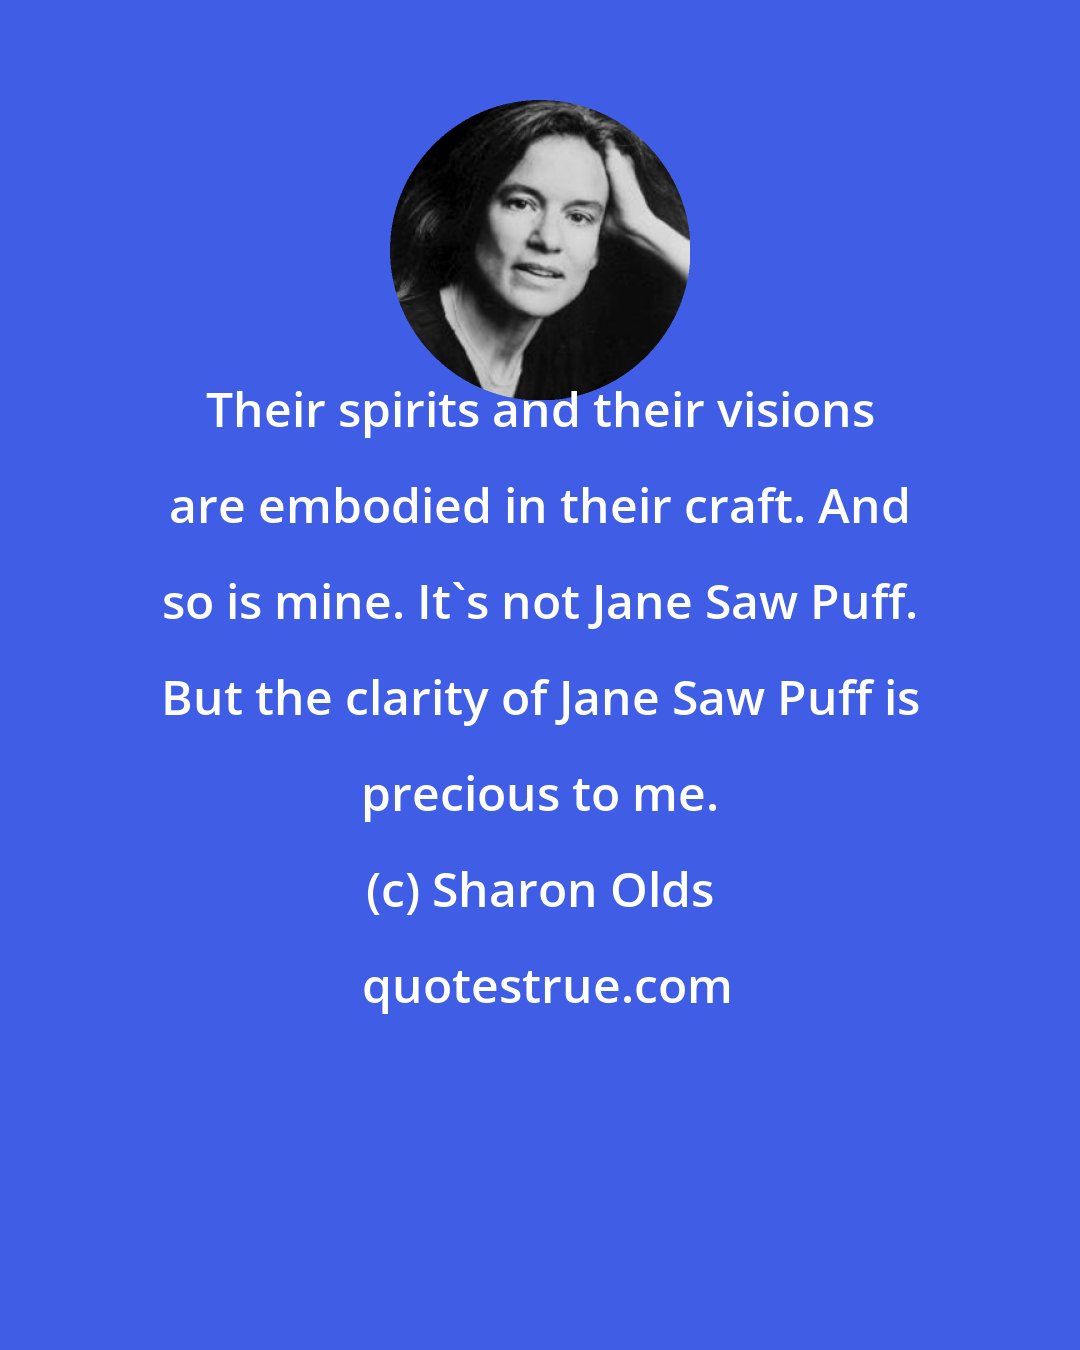 Sharon Olds: Their spirits and their visions are embodied in their craft. And so is mine. It's not Jane Saw Puff. But the clarity of Jane Saw Puff is precious to me.